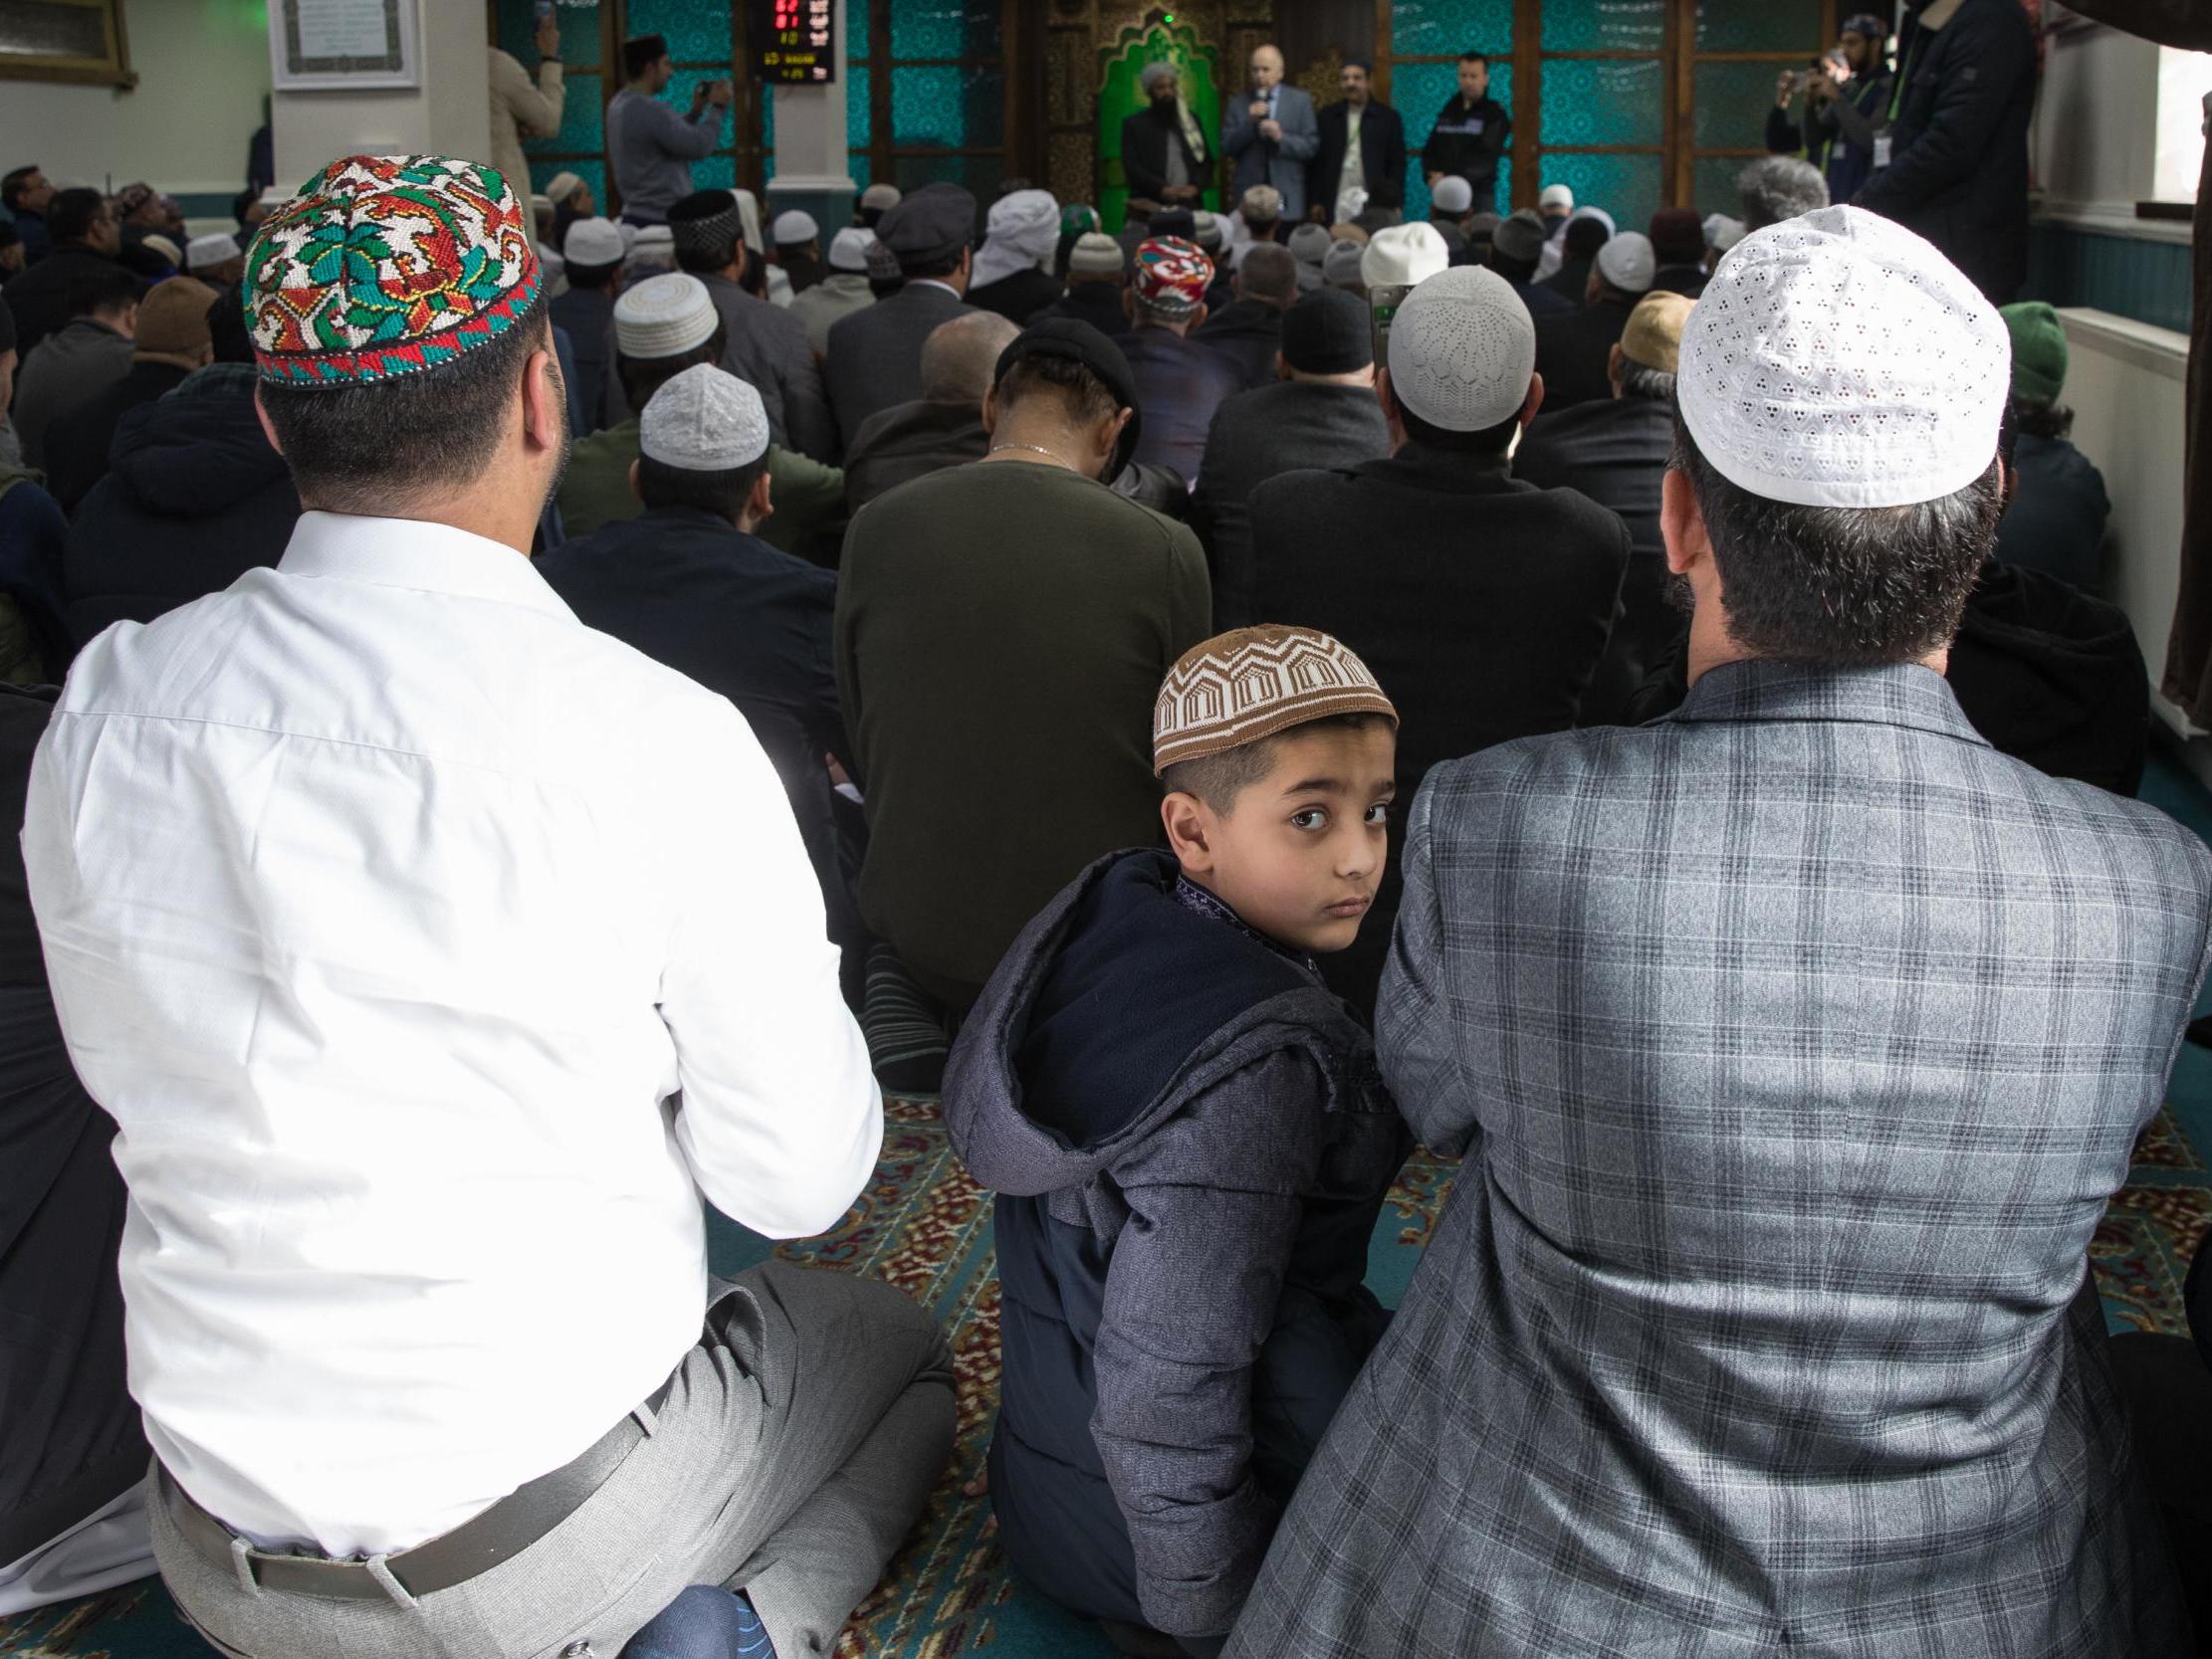 Friday prayers at Slade Road mosque, where windows were smashed in a hate crime in March